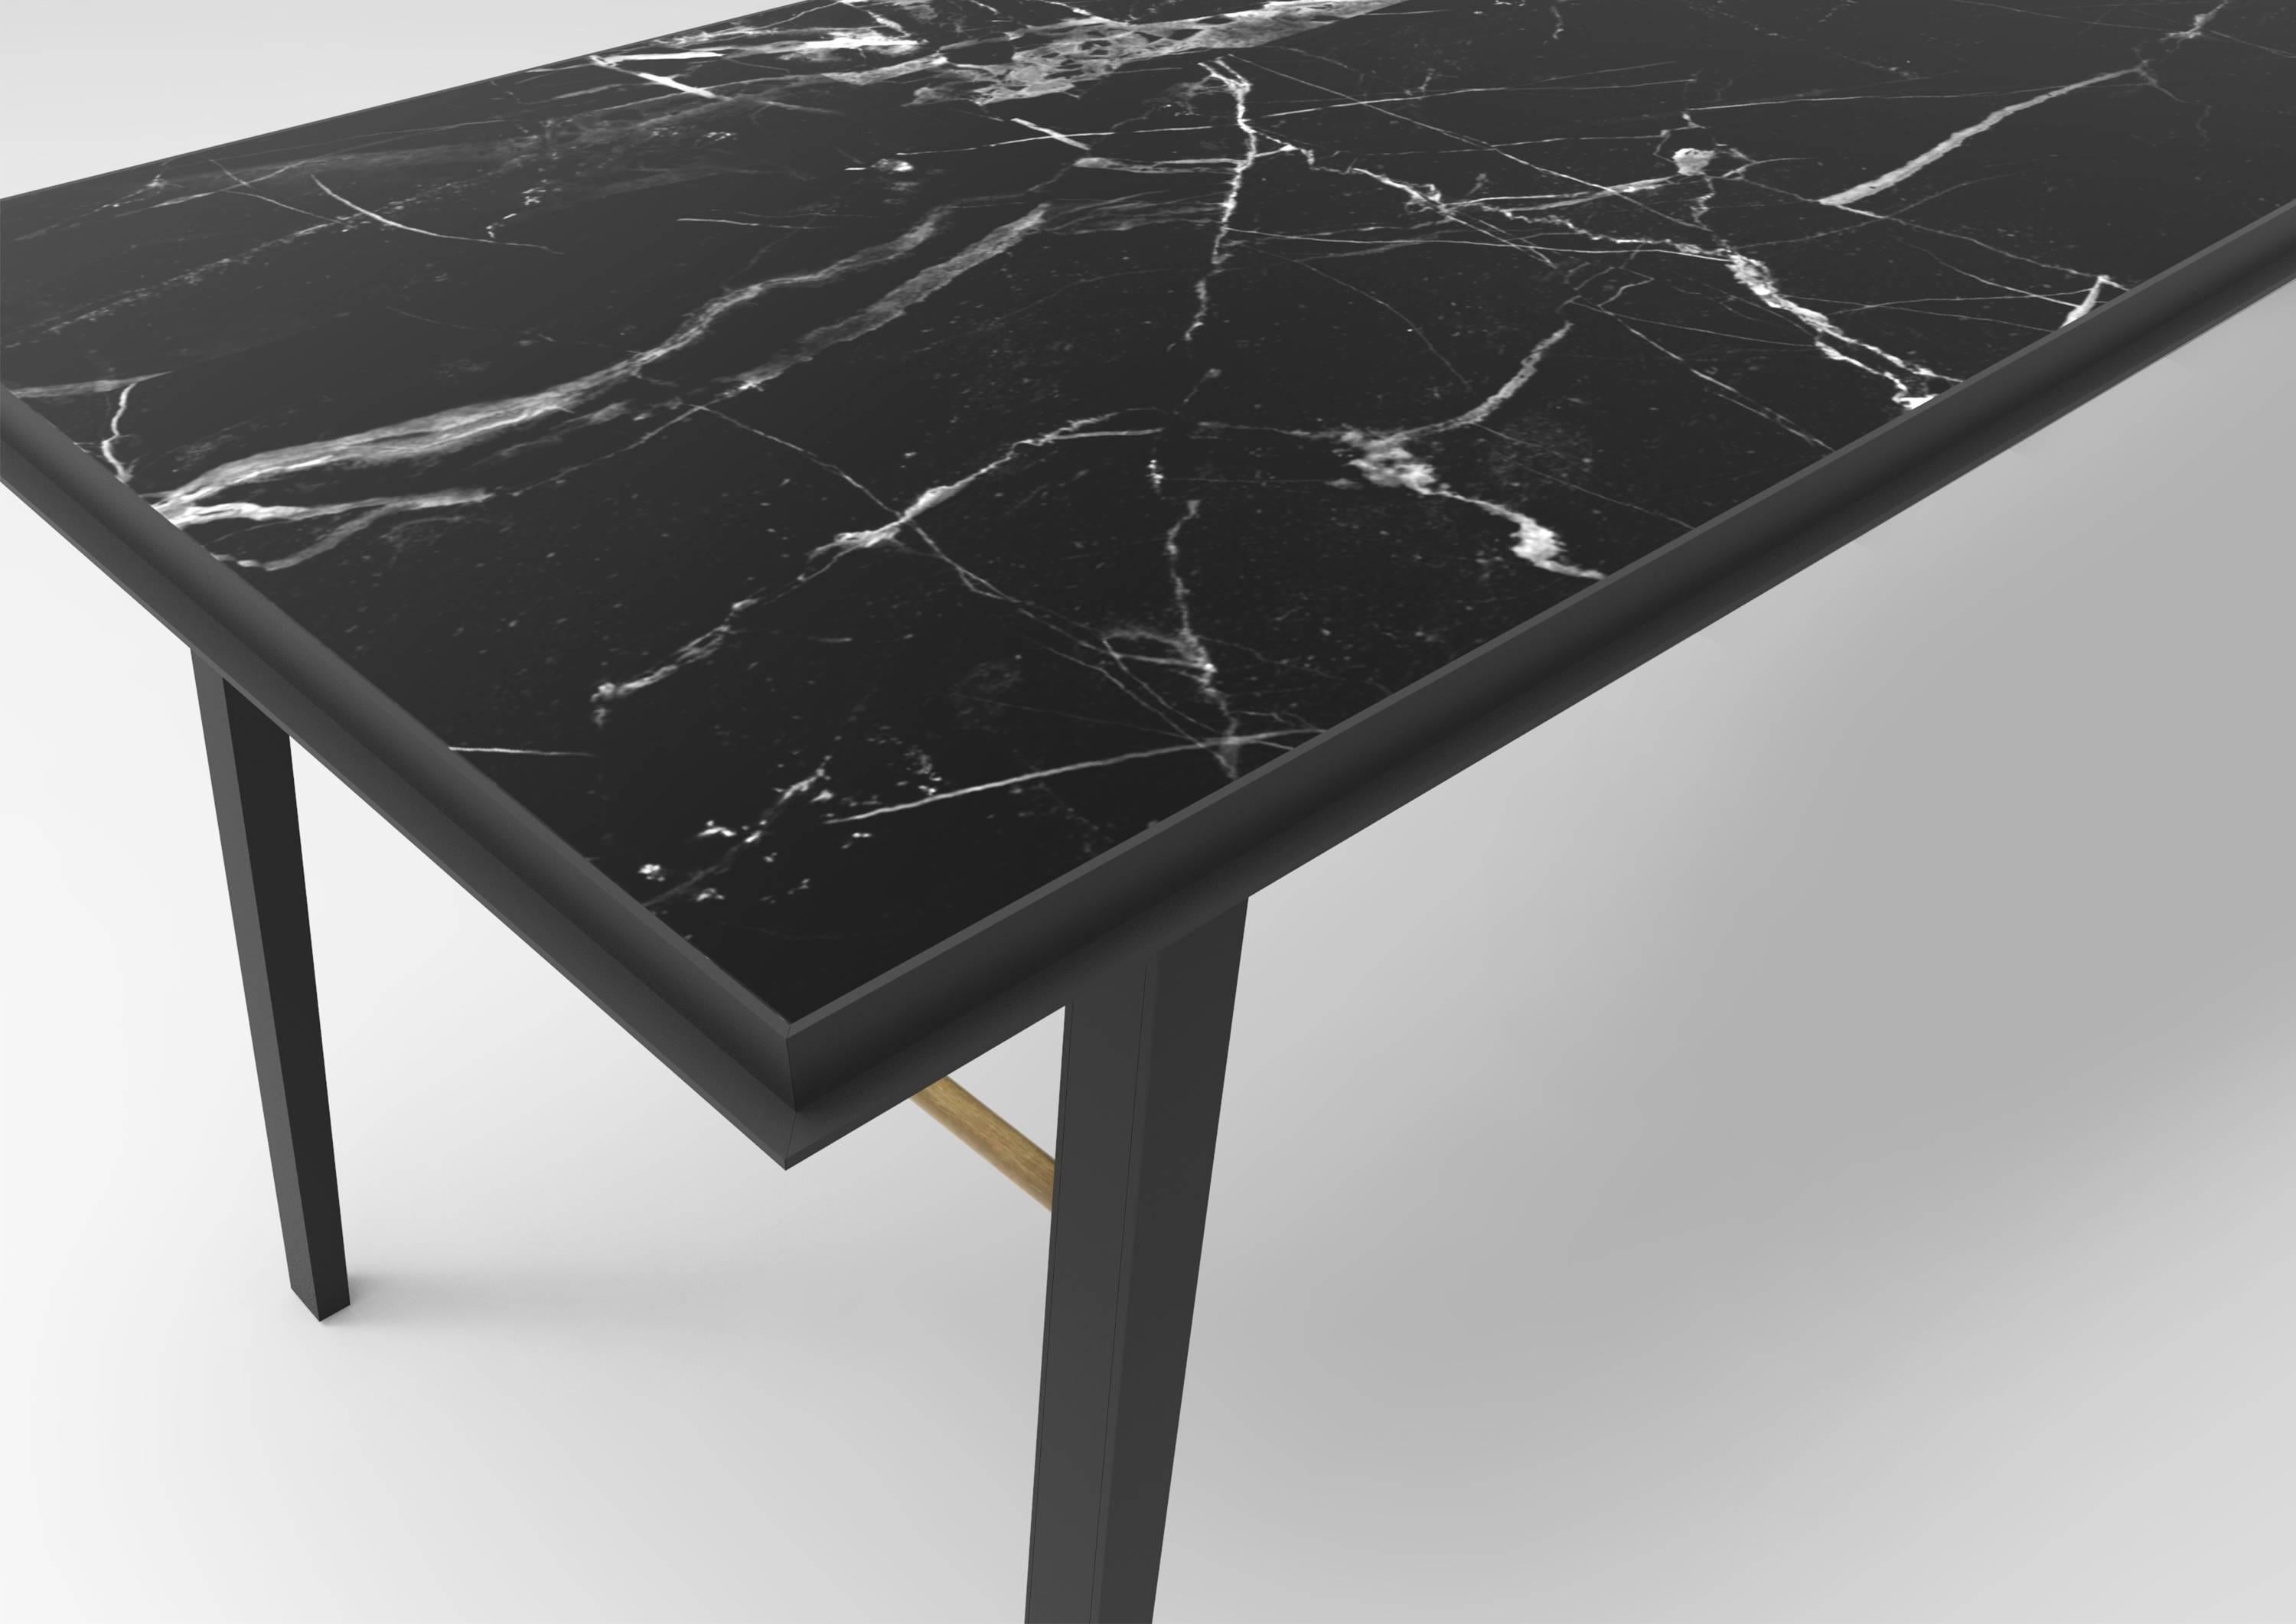 AES black marble contemporary desk, Jan Garncarek
Materials: Nero Marquina marble, brass, steel.
Dimensions: 73 x 180 x 78 cm
Weight: 110 kg

This unique desk consists of a metal collar with nero marquina marble top.
The frame is made from